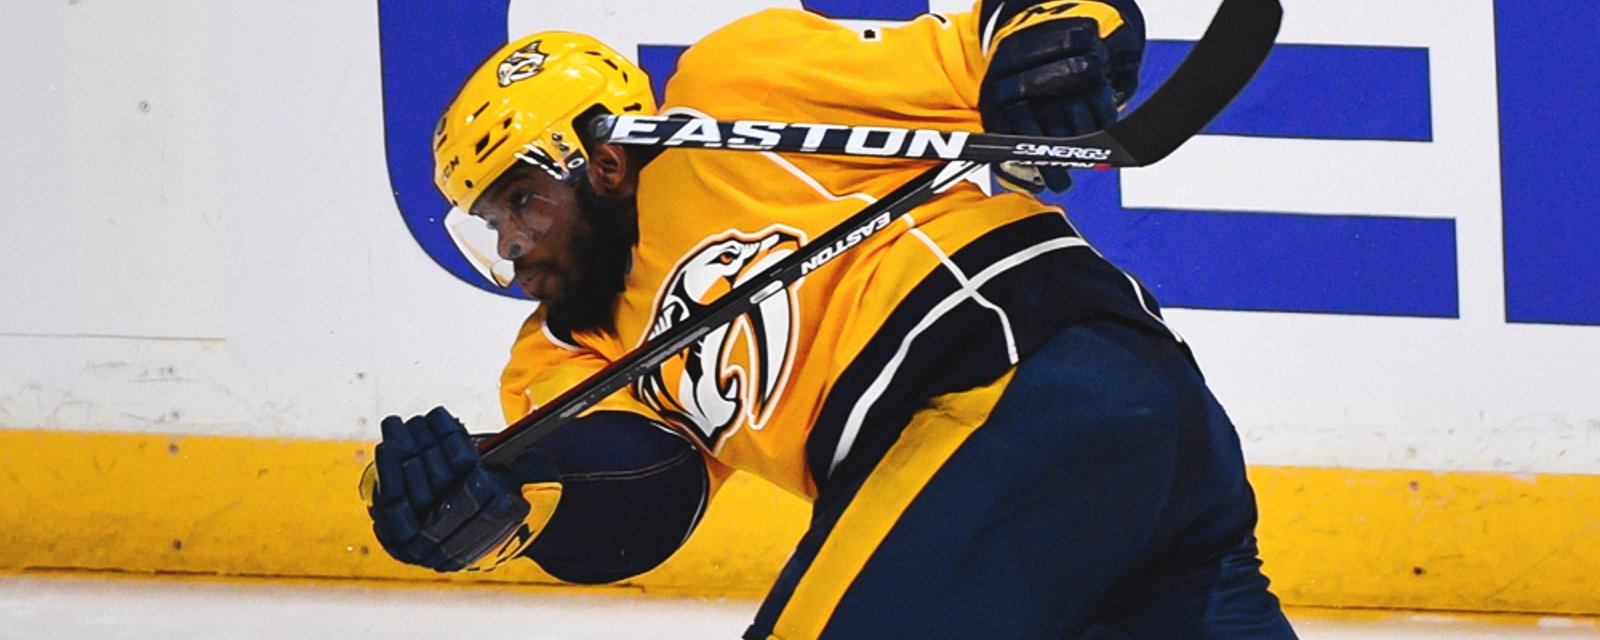 Report: P.K. Subban has harsh comments on his teammates.